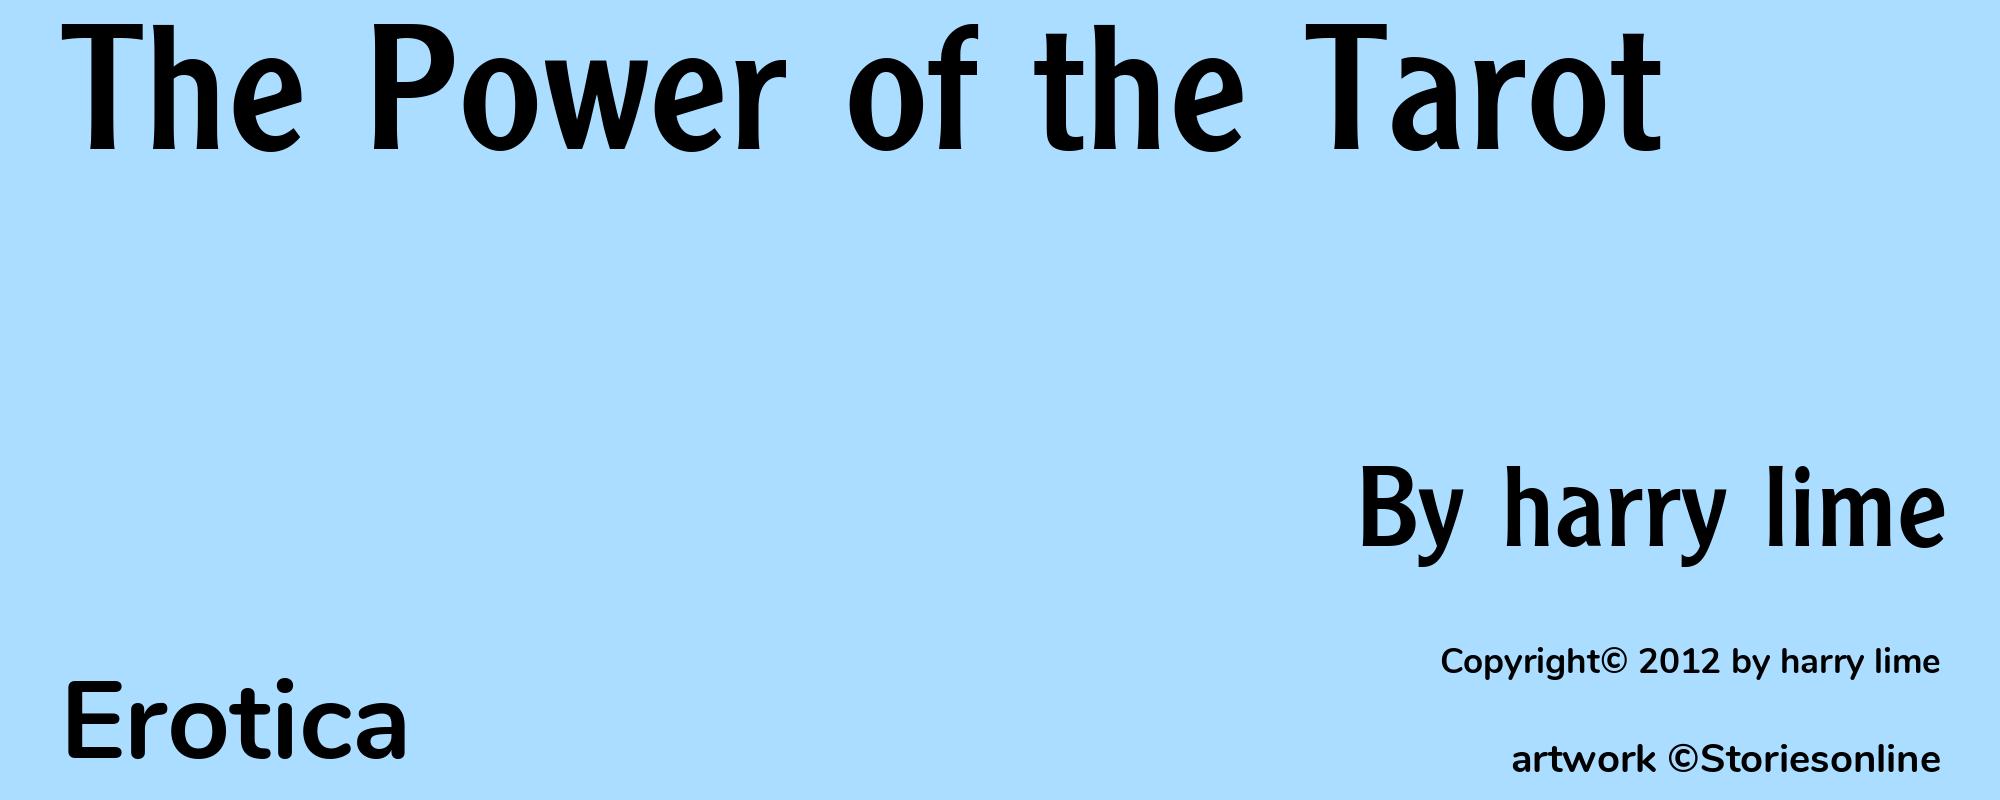 The Power of the Tarot - Cover